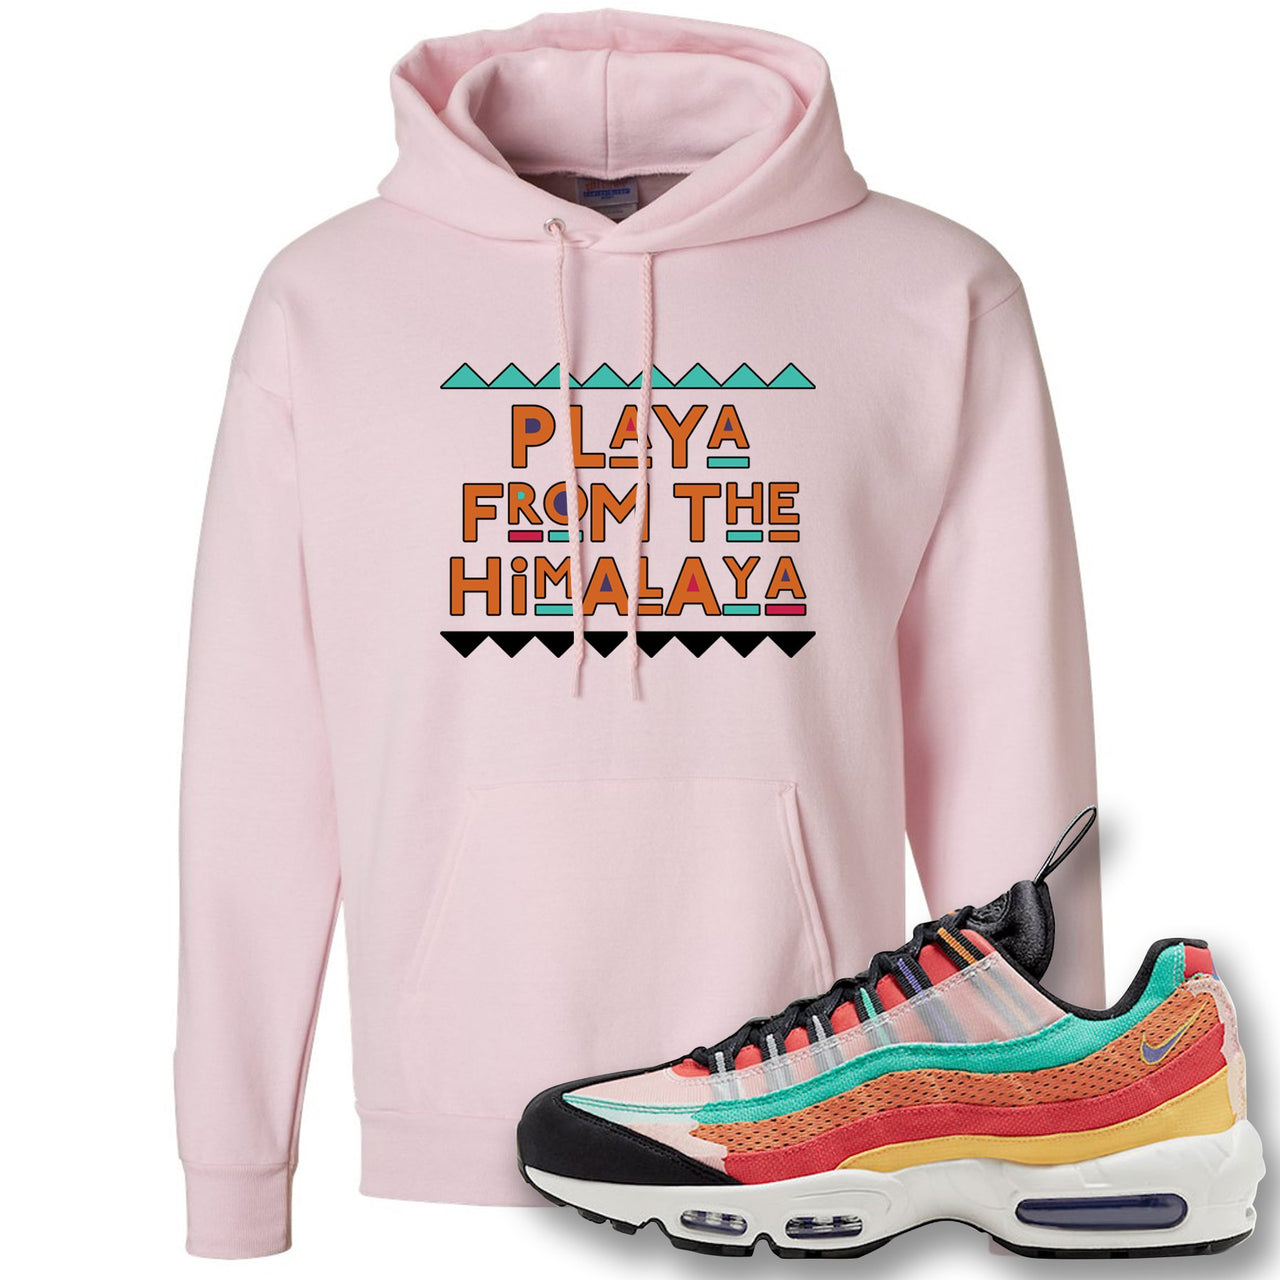 Air Max 95 Black History Month Sneaker Light Pink Pullover Hoodie | Hoodie to match Nike Air Max 95 Black History Month Shoes | Playa From The Himalaya